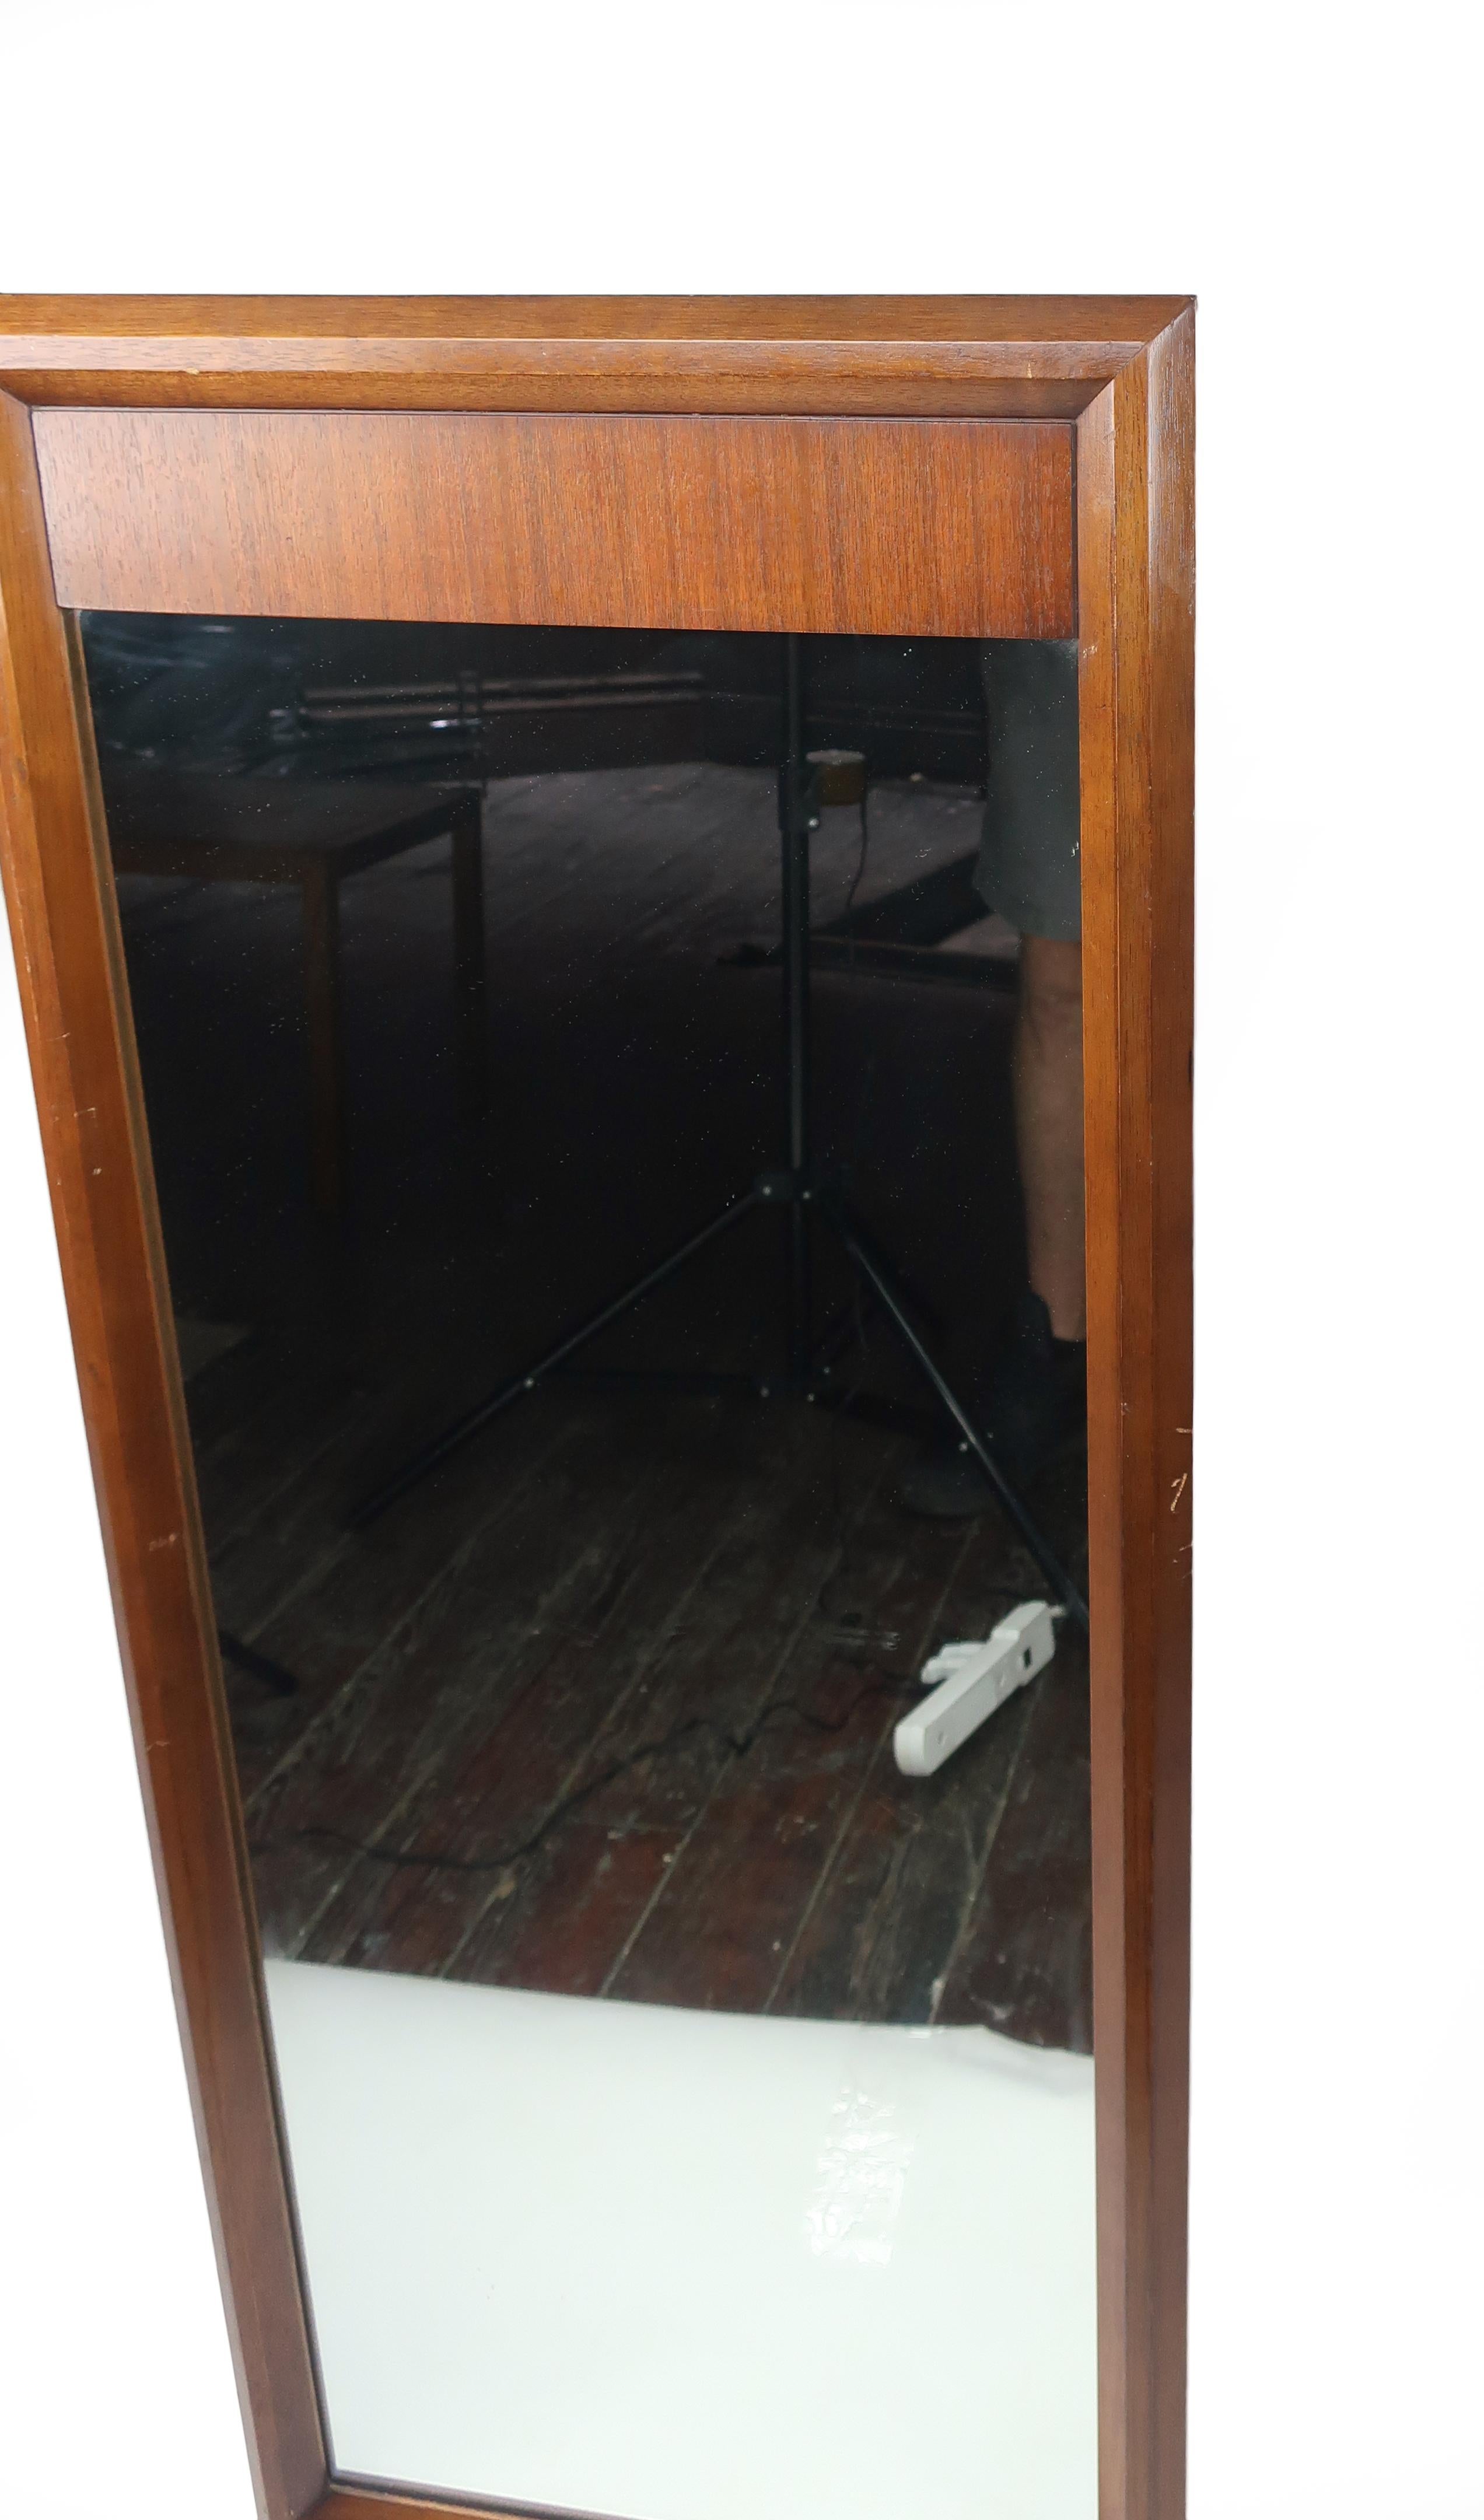 A handsome Mid-Century Modern walnut wall mirror. Rectangular with a strip of richly grained wood across the top it would be great in an entry way, hallway or bedroom. In good vintage condition with wear consistent with age and use. Marked “Galax